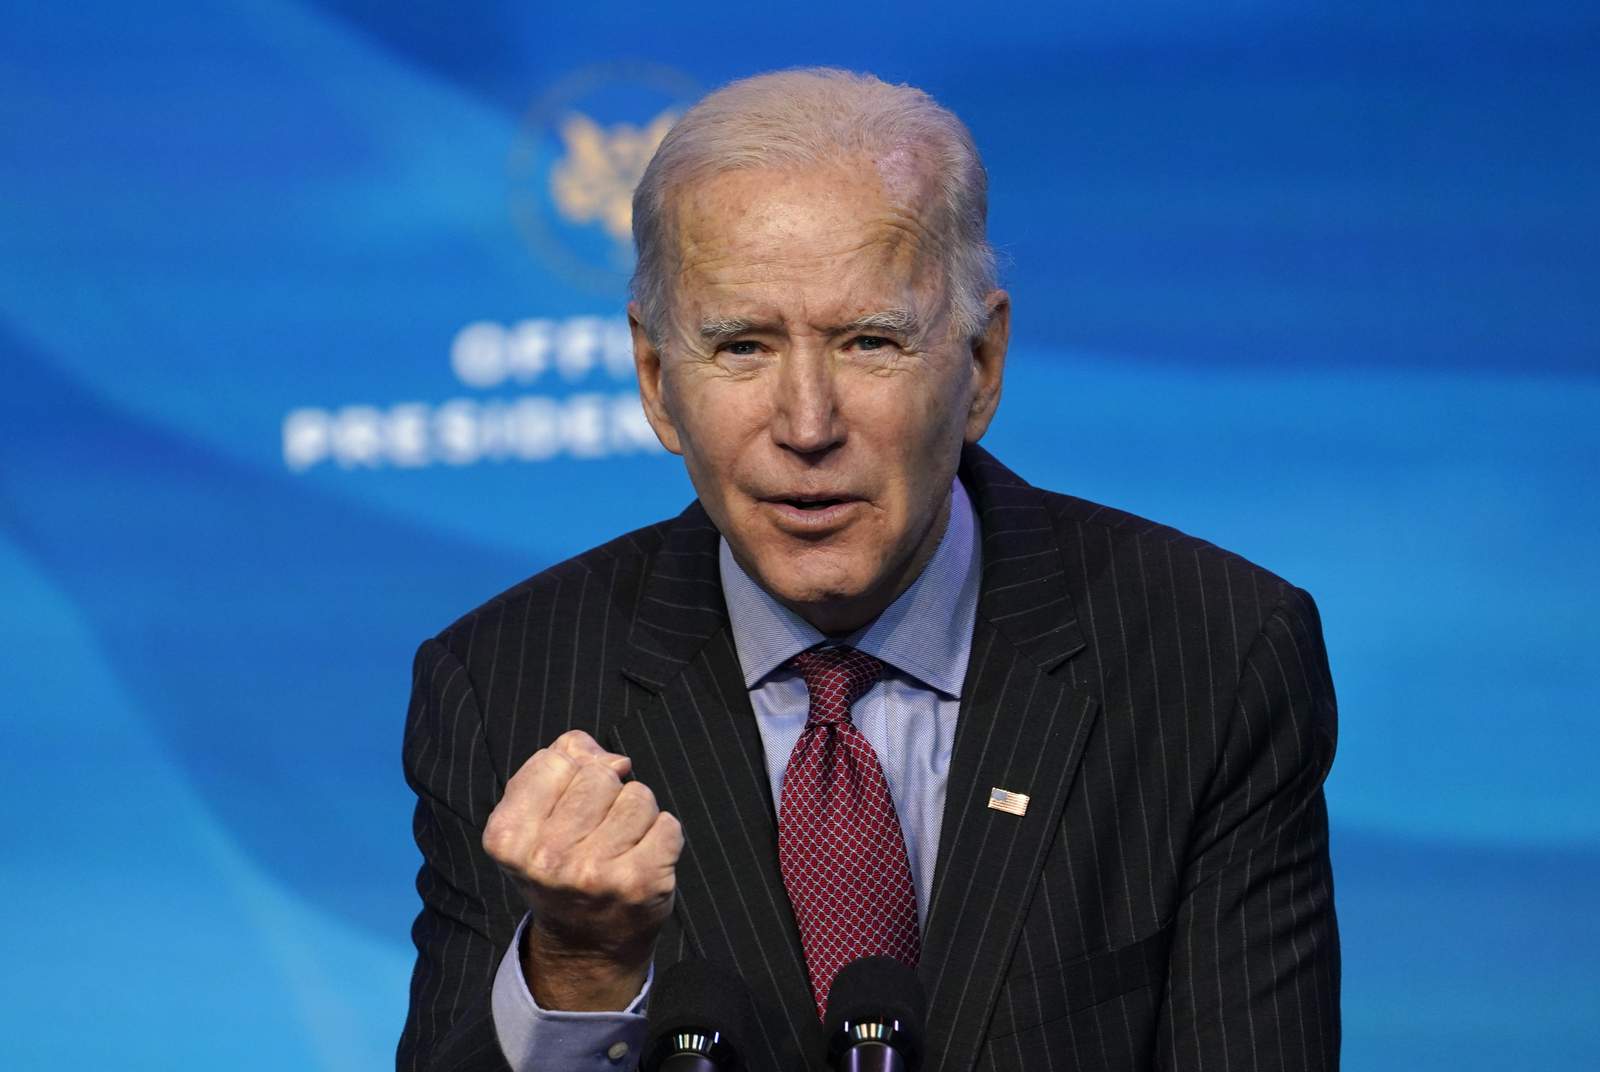 Advocacy group: Biden should revamp US human rights policy